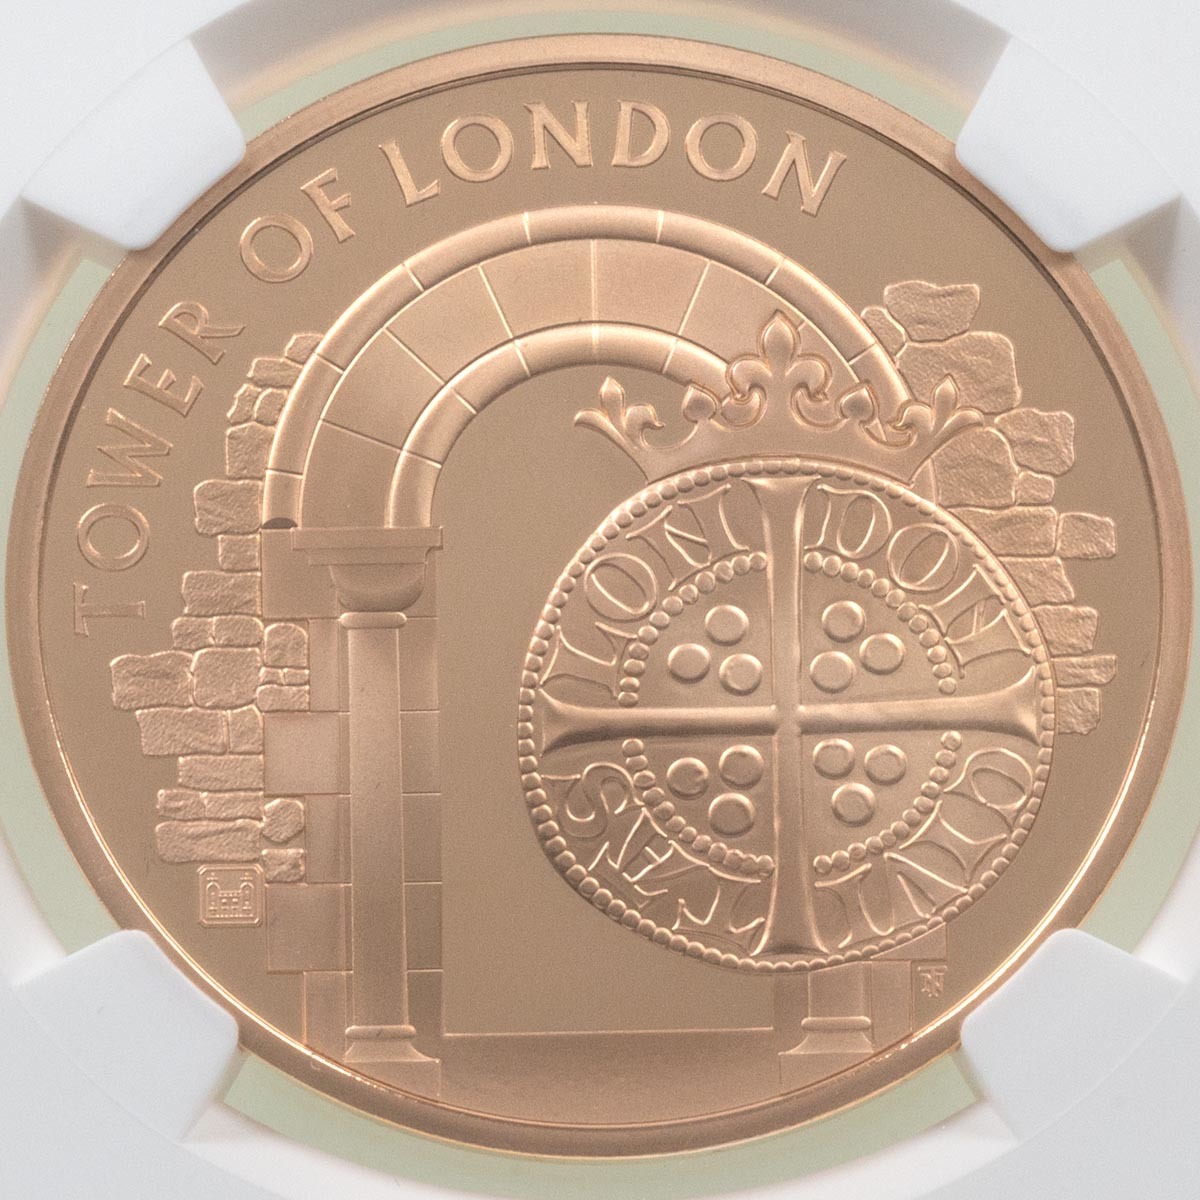 UK20RMGP 2020 Royal Mint Tower Of London Five Pound Gold Proof Coin NGC Graded PF 70 Ultra Cameo Reverse